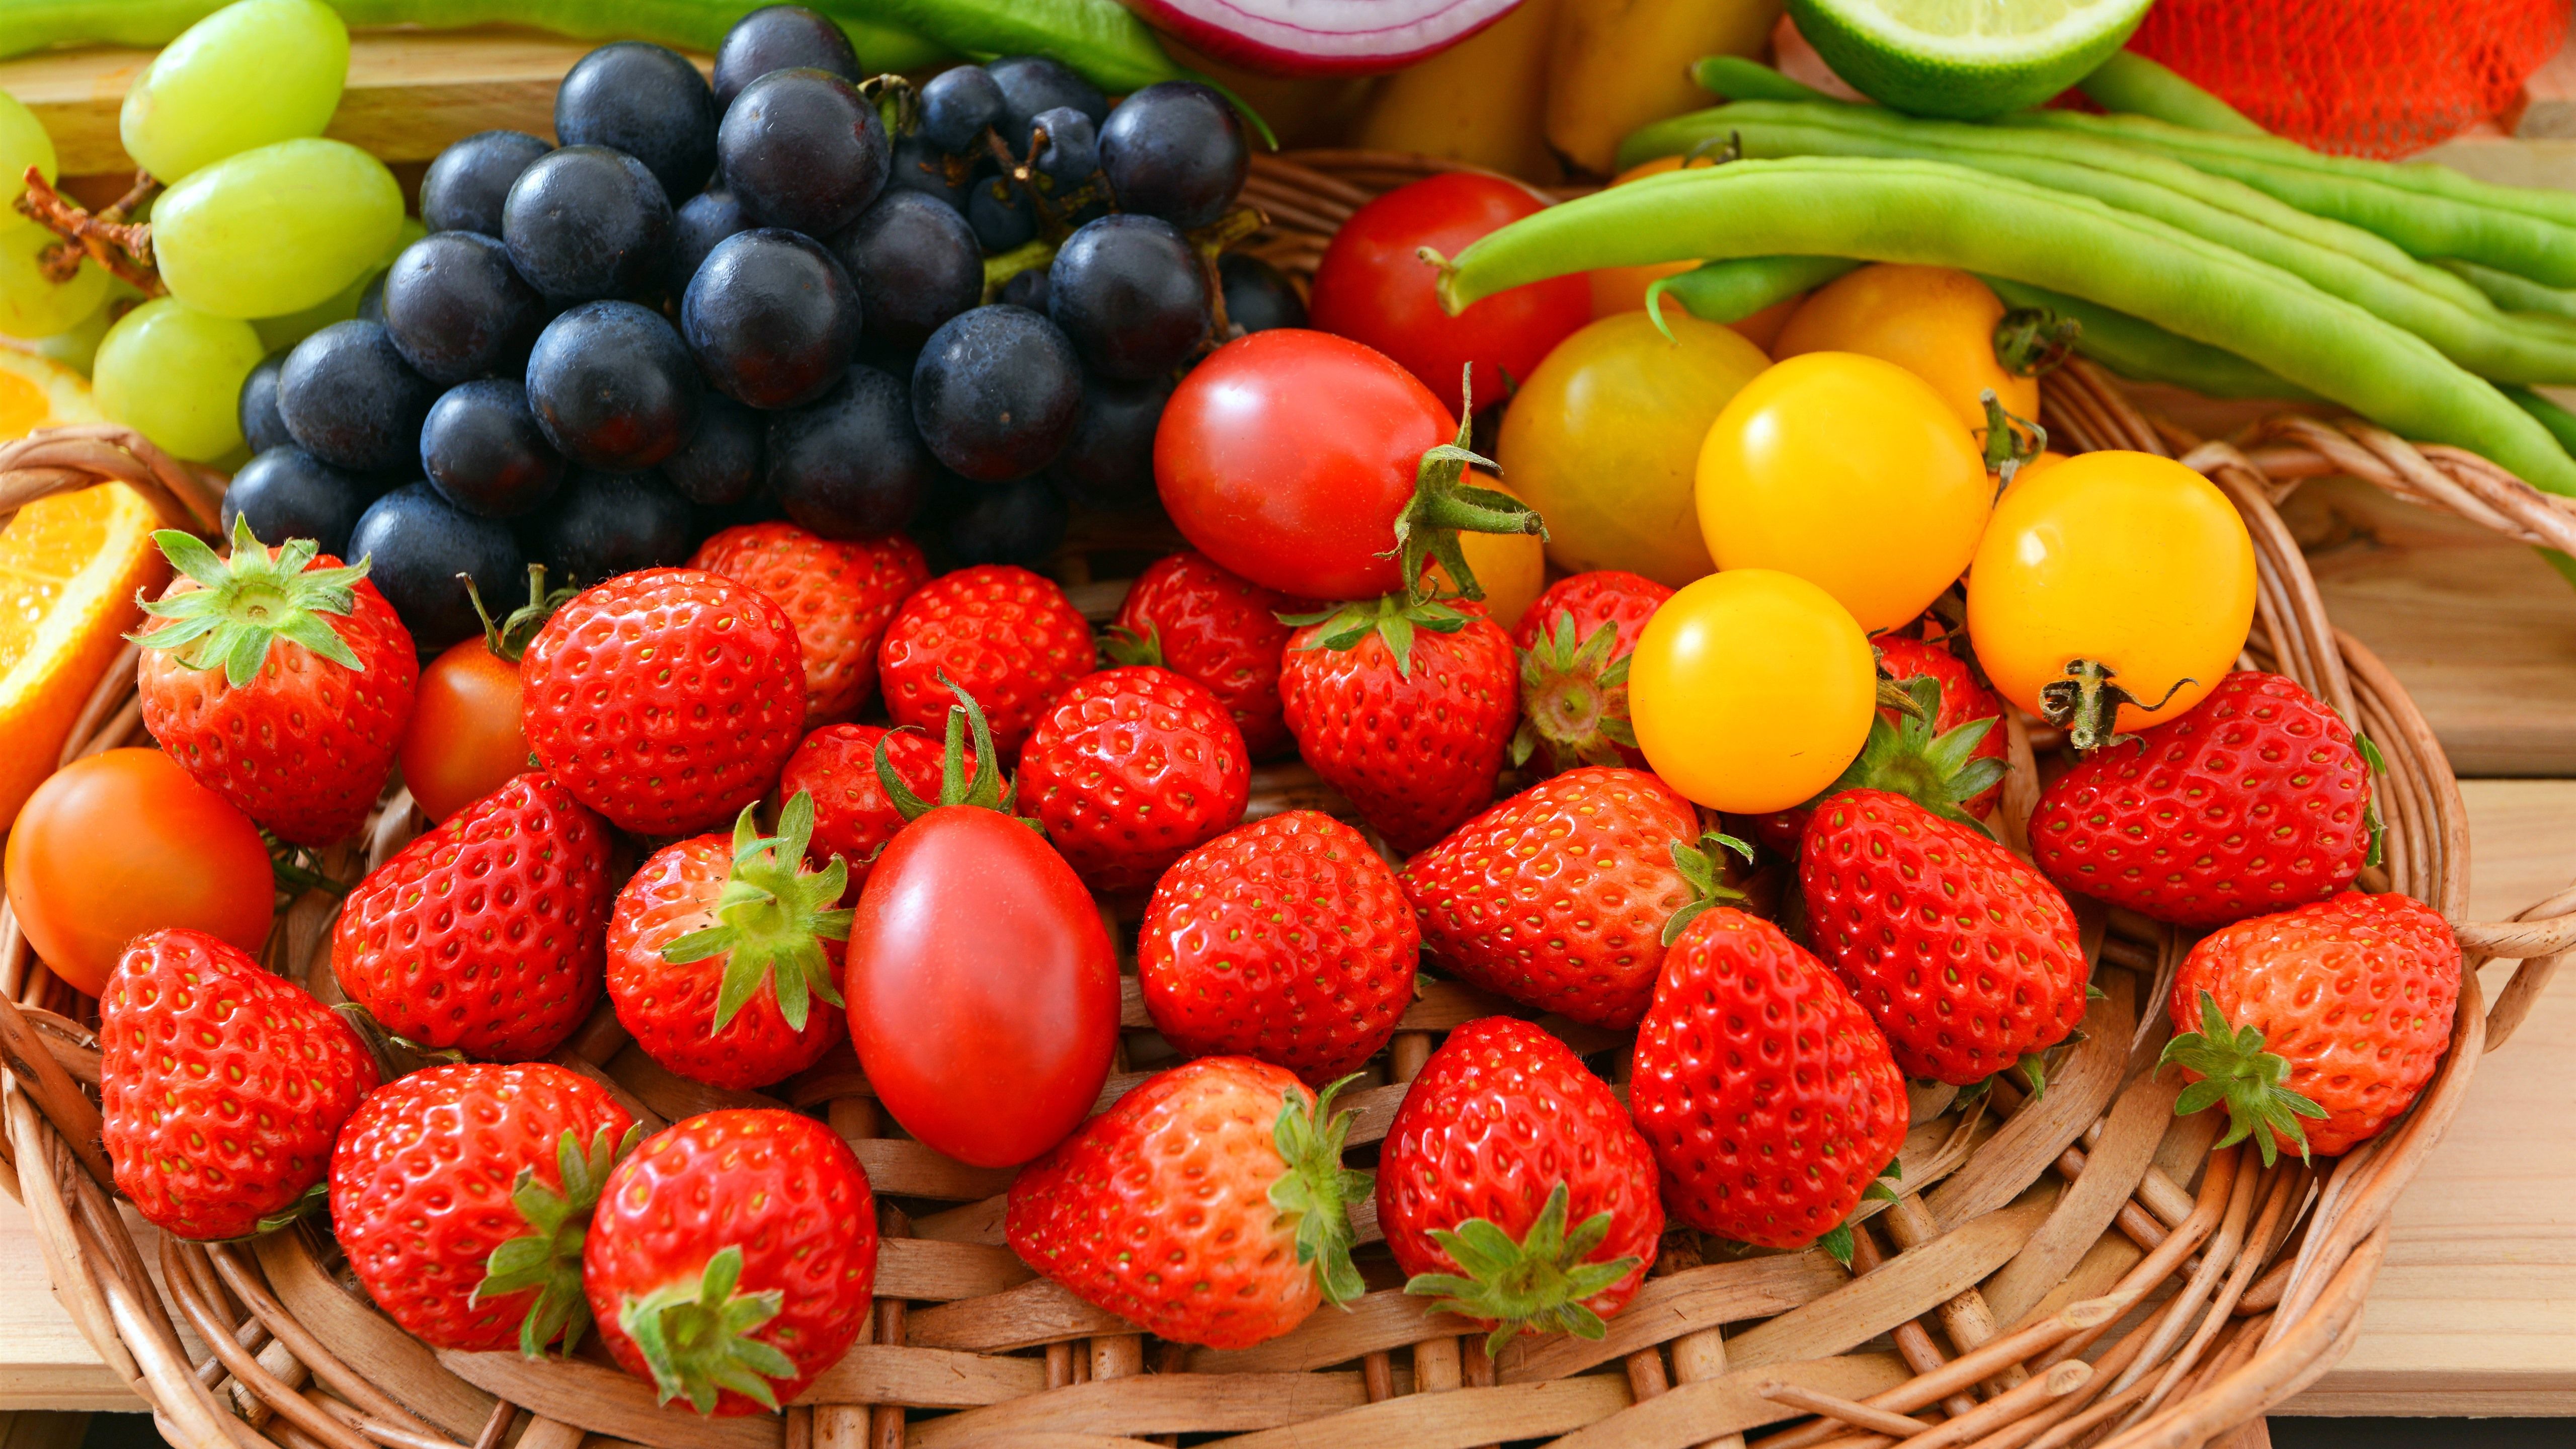 Wallpaper Delicious fruit, strawberry, grapes, tomatoes, vegetables 5120x2880 UHD 5K Picture, Image